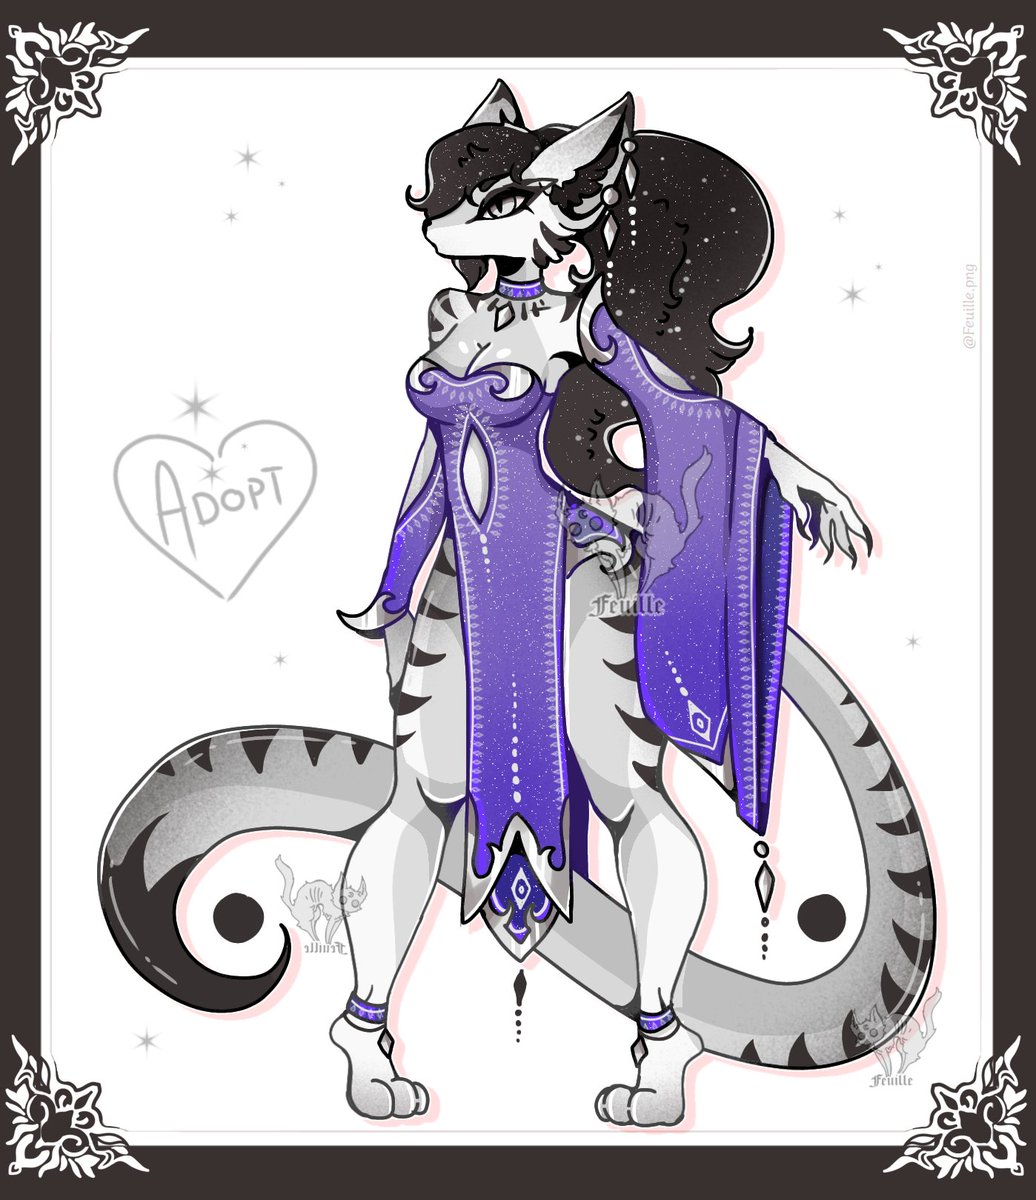 [ Open ] ☁️🌑 Sylvia the white and black fox auction Adopt available here: ych.commishes.com/auction/show/3… #adoptable #furryartist #furryfandom #adopts #art #furryartist #furry #fox #anthro